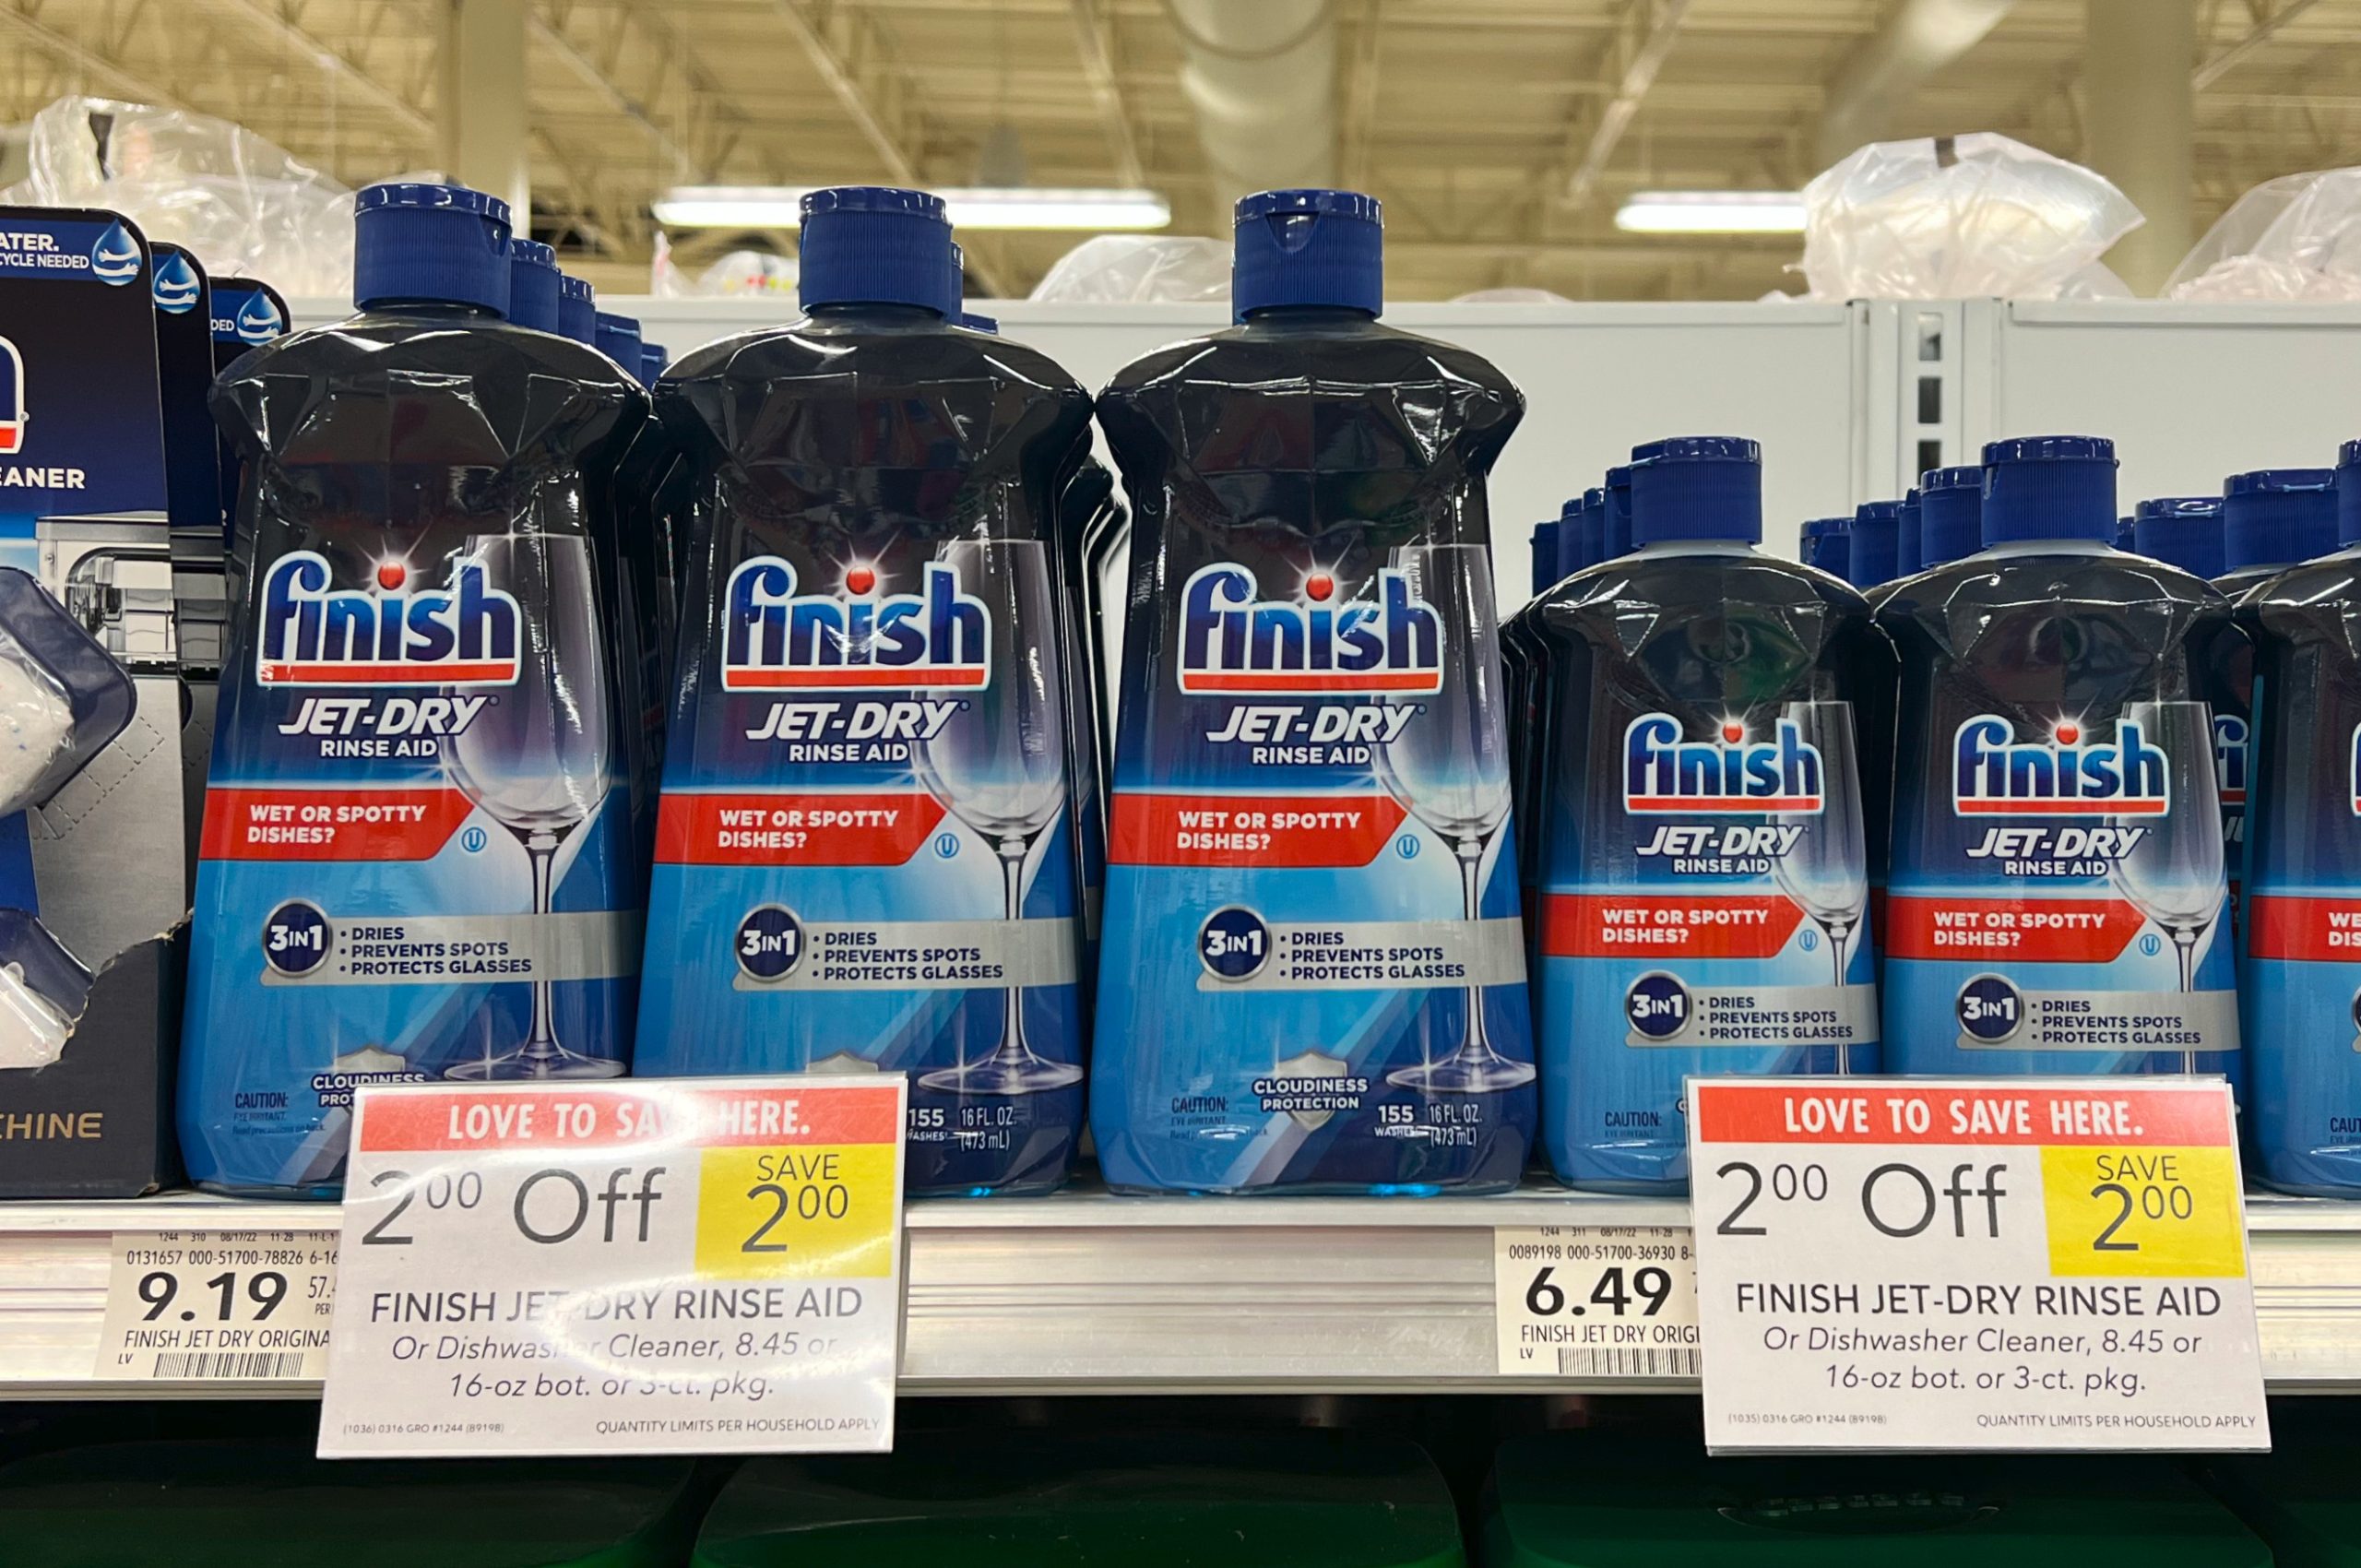 Get A Nice Deal On Finish Jet Dry – As Low As 99¢ At Publix - iHeartPublix